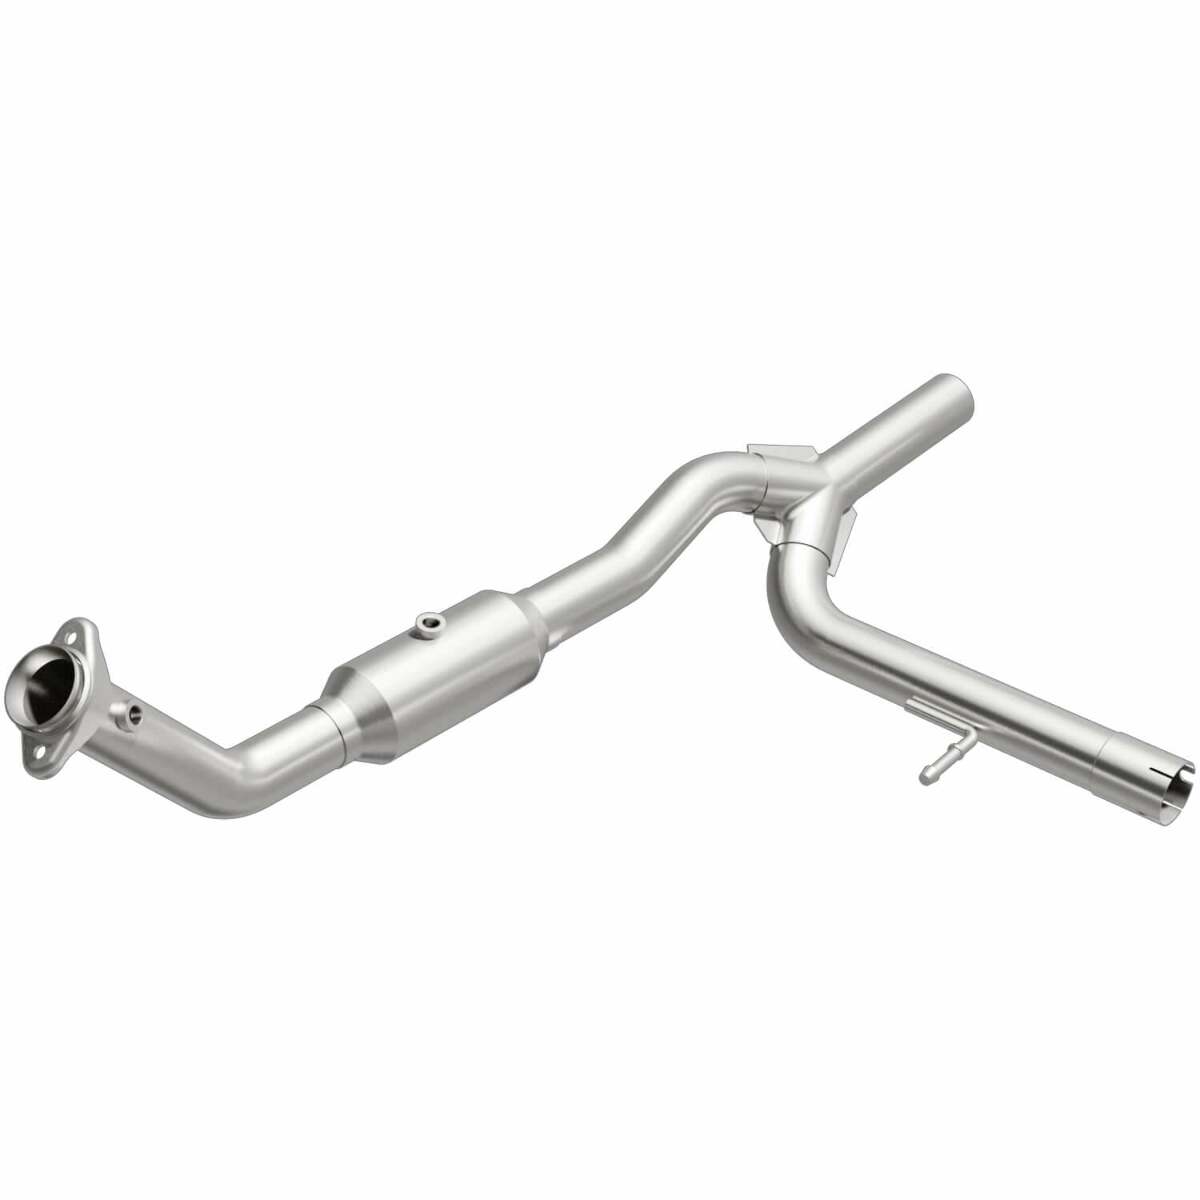 2007 2008 Ford F-150 4.6L Direct-Fit Catalytic Converter 5451410 Magnaflow